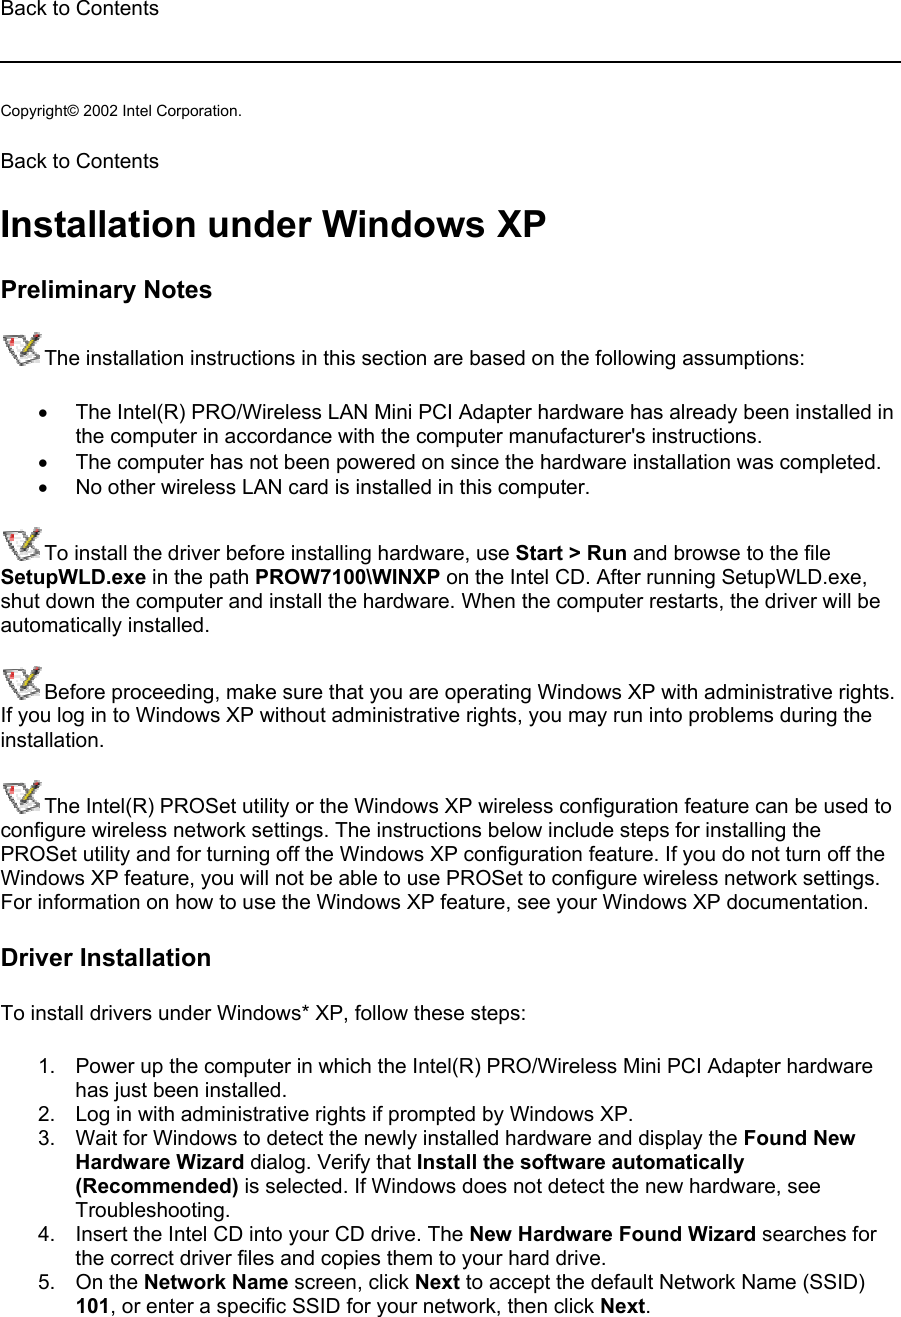 Back to Contents   Copyright© 2002 Intel Corporation.  Back to Contents  Installation under Windows XP Preliminary Notes The installation instructions in this section are based on the following assumptions: •  The Intel(R) PRO/Wireless LAN Mini PCI Adapter hardware has already been installed in the computer in accordance with the computer manufacturer&apos;s instructions. •  The computer has not been powered on since the hardware installation was completed. •  No other wireless LAN card is installed in this computer. To install the driver before installing hardware, use Start &gt; Run and browse to the file SetupWLD.exe in the path PROW7100\WINXP on the Intel CD. After running SetupWLD.exe, shut down the computer and install the hardware. When the computer restarts, the driver will be automatically installed. Before proceeding, make sure that you are operating Windows XP with administrative rights. If you log in to Windows XP without administrative rights, you may run into problems during the installation.  The Intel(R) PROSet utility or the Windows XP wireless configuration feature can be used to configure wireless network settings. The instructions below include steps for installing the PROSet utility and for turning off the Windows XP configuration feature. If you do not turn off the Windows XP feature, you will not be able to use PROSet to configure wireless network settings. For information on how to use the Windows XP feature, see your Windows XP documentation. Driver Installation To install drivers under Windows* XP, follow these steps:  1.  Power up the computer in which the Intel(R) PRO/Wireless Mini PCI Adapter hardware has just been installed. 2.  Log in with administrative rights if prompted by Windows XP. 3.  Wait for Windows to detect the newly installed hardware and display the Found New Hardware Wizard dialog. Verify that Install the software automatically (Recommended) is selected. If Windows does not detect the new hardware, see Troubleshooting. 4.  Insert the Intel CD into your CD drive. The New Hardware Found Wizard searches for the correct driver files and copies them to your hard drive. 5. On the Network Name screen, click Next to accept the default Network Name (SSID) 101, or enter a specific SSID for your network, then click Next. 